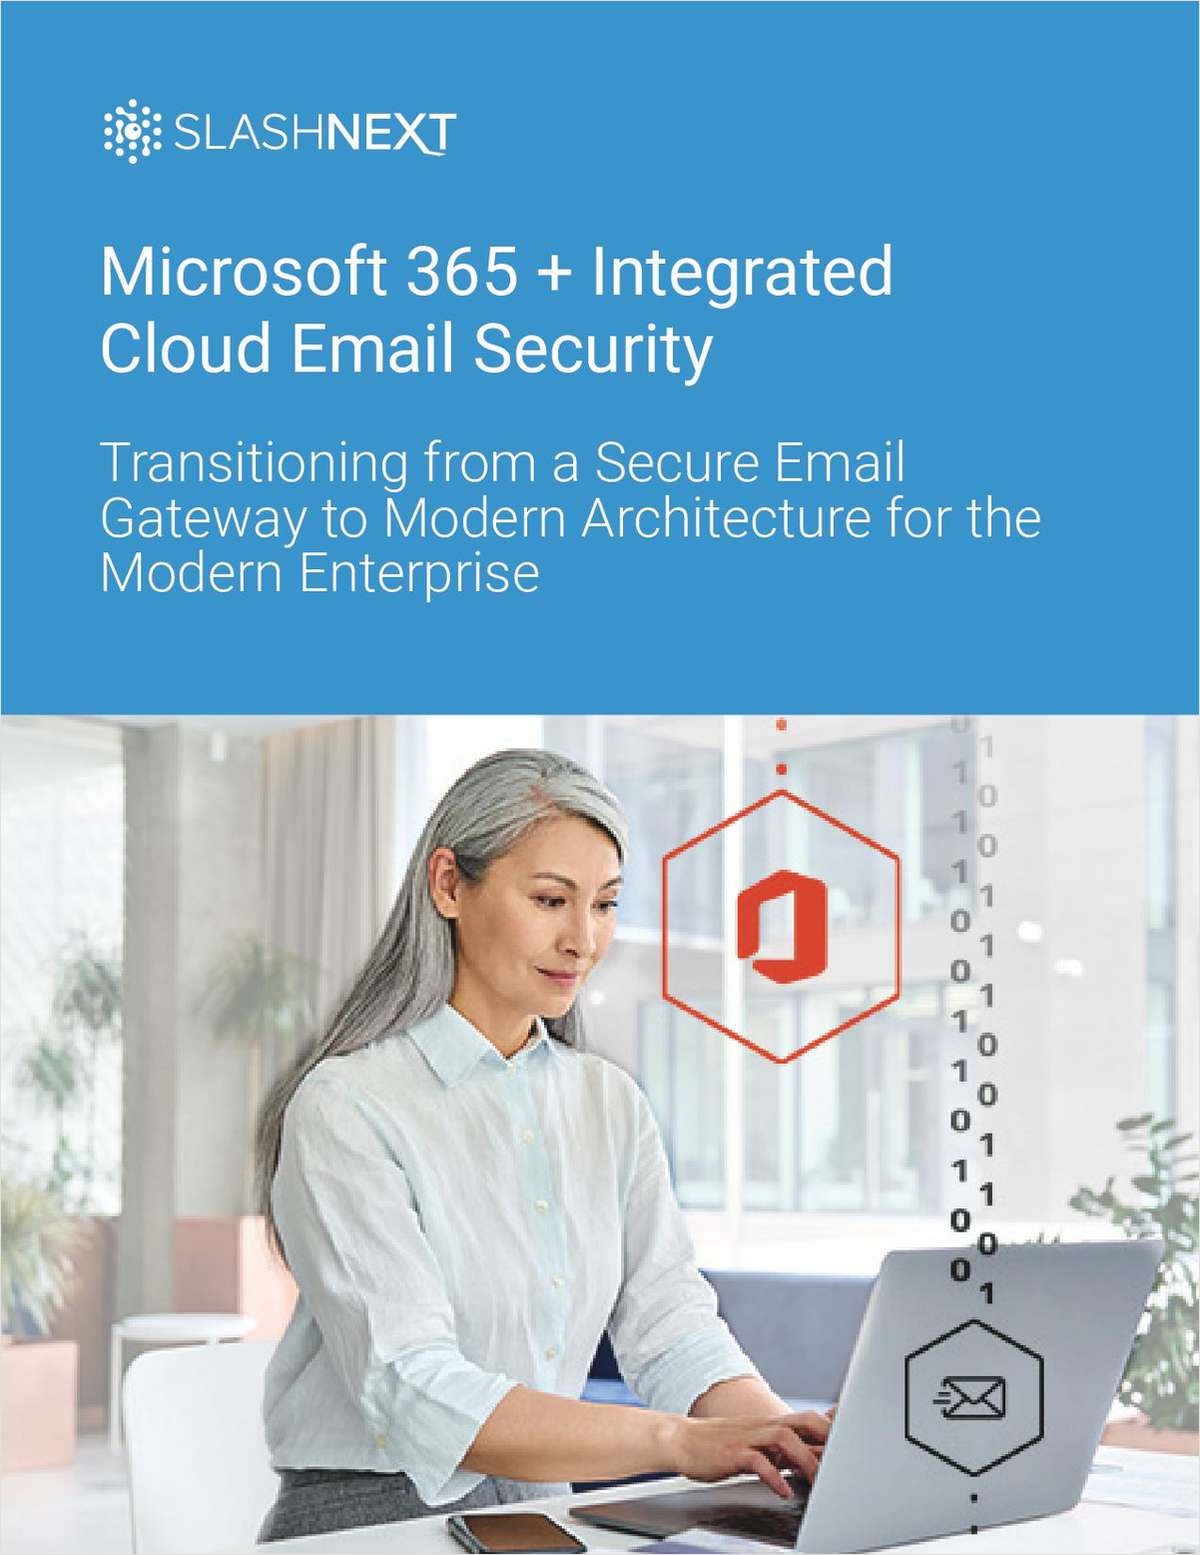 Microsoft 365 and Integrated Cloud Email Security: Transitioning from a SEG to ICES